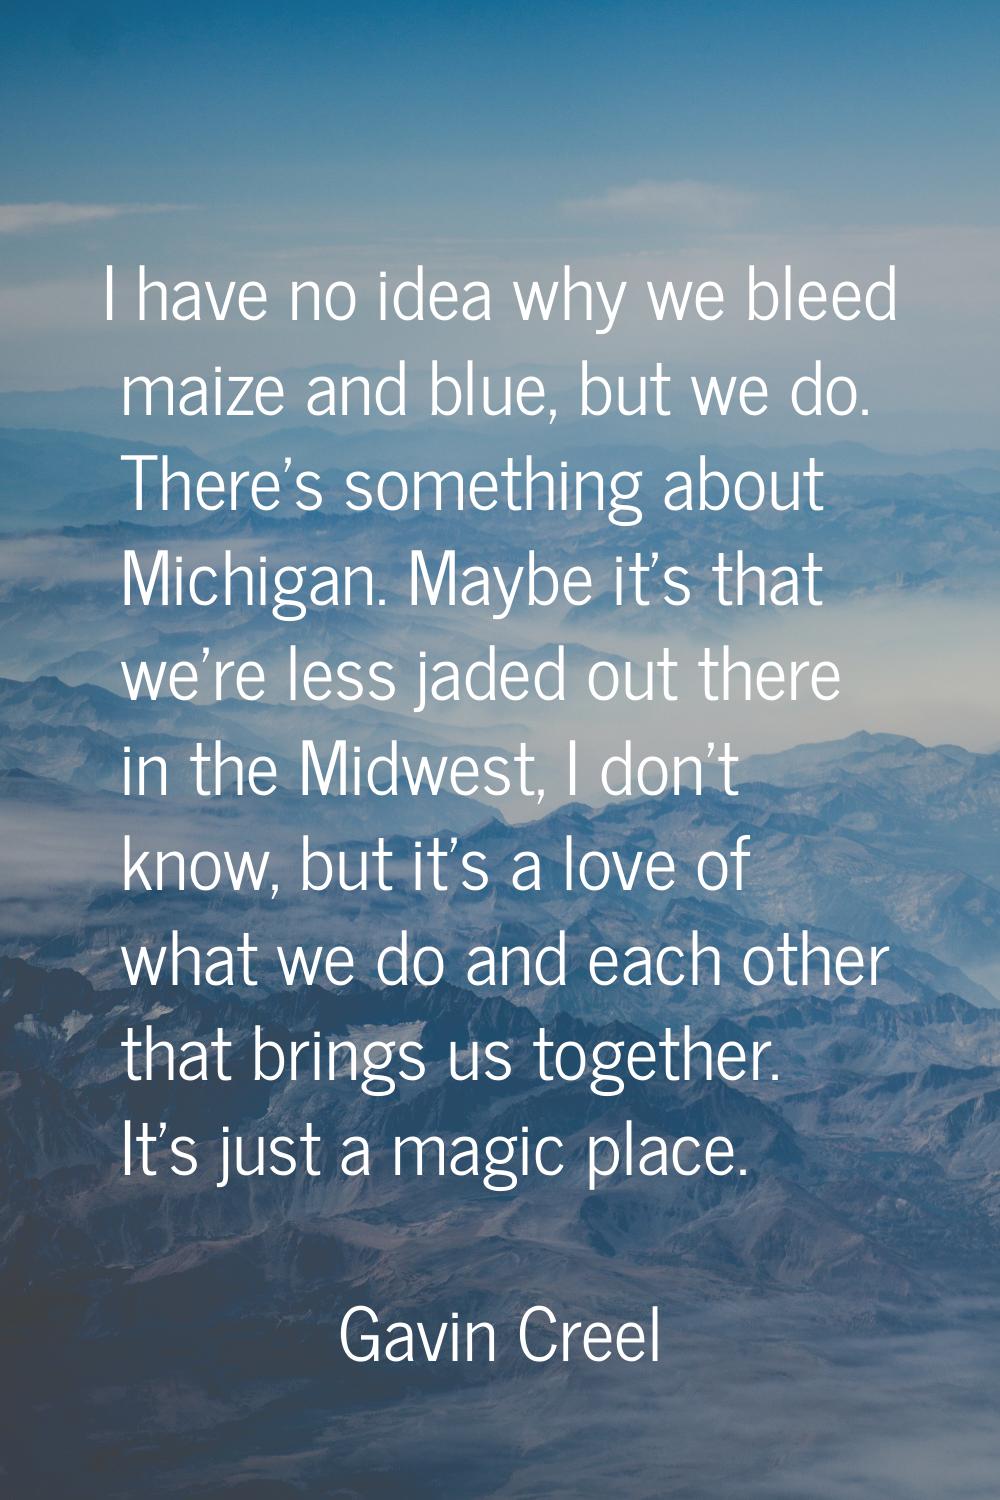 I have no idea why we bleed maize and blue, but we do. There's something about Michigan. Maybe it's